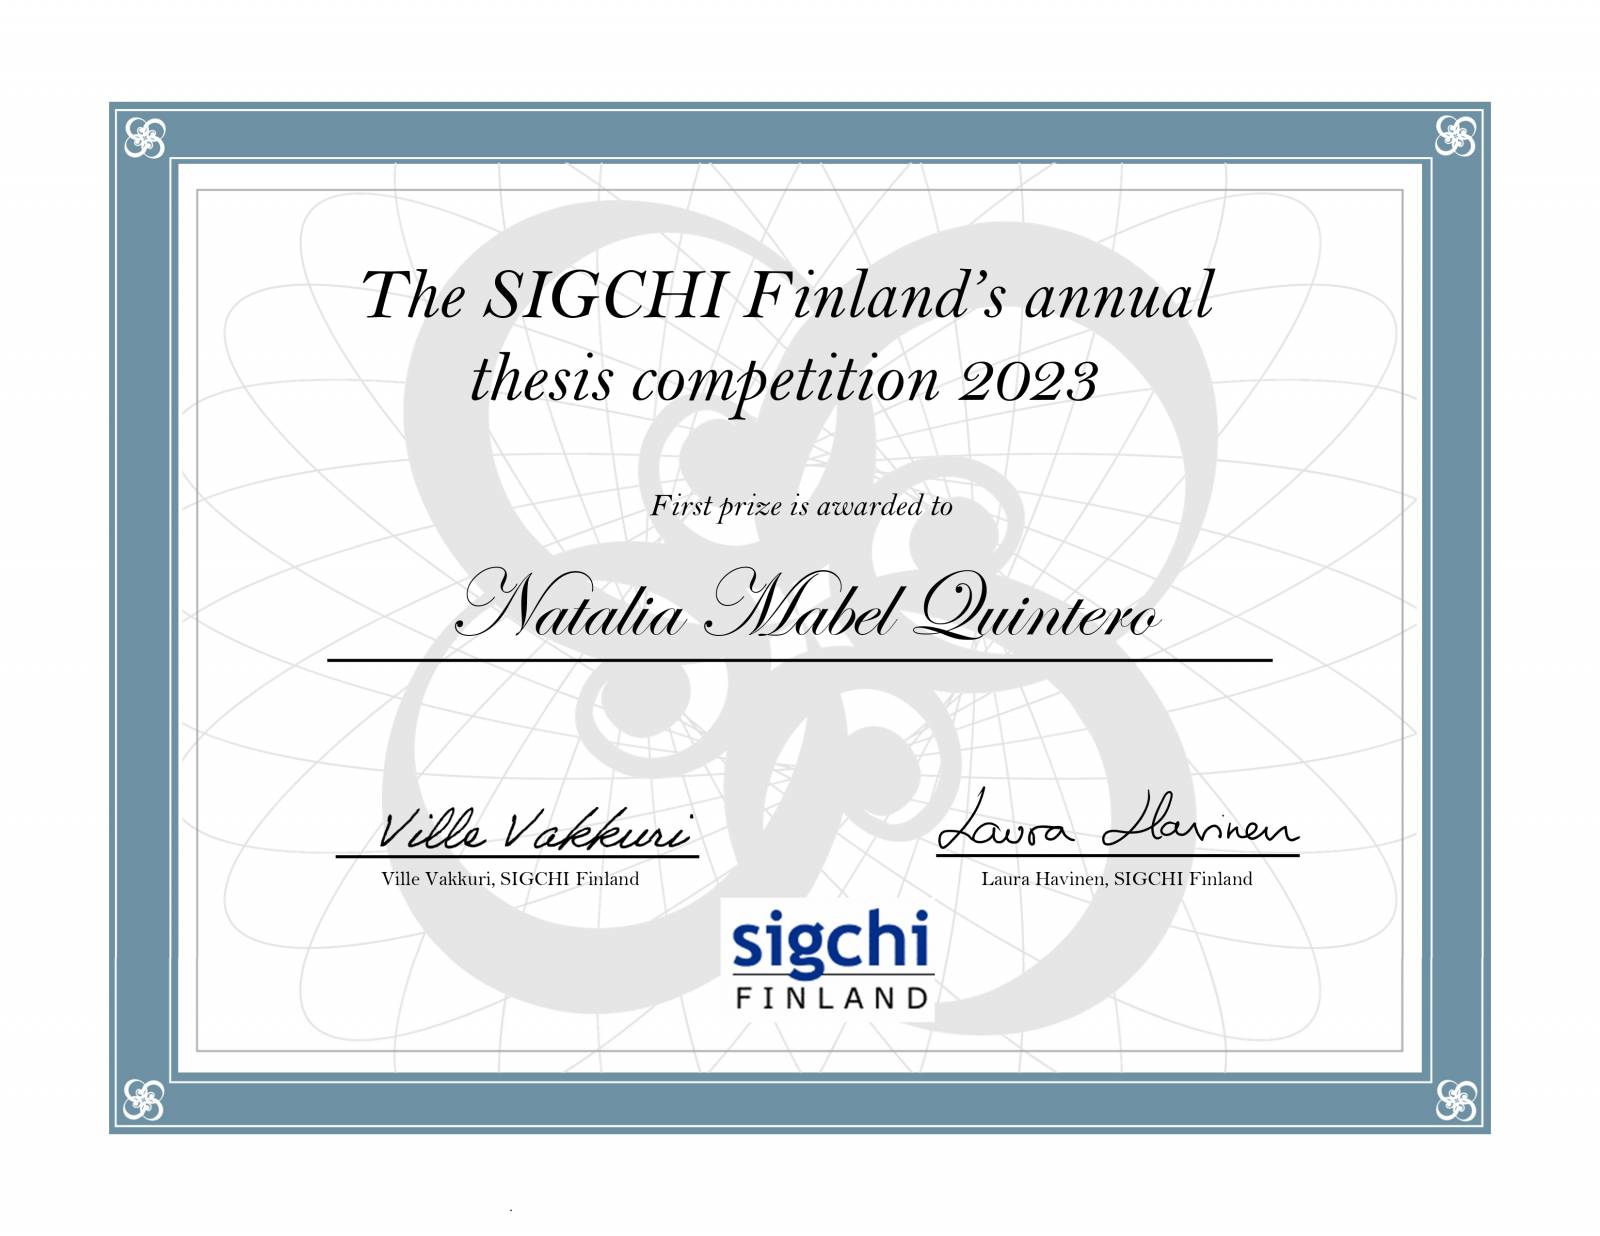 Diploma given to Natalia Quintero for the first prize of the SIGCHI Finland's annual thesis competition 2023.